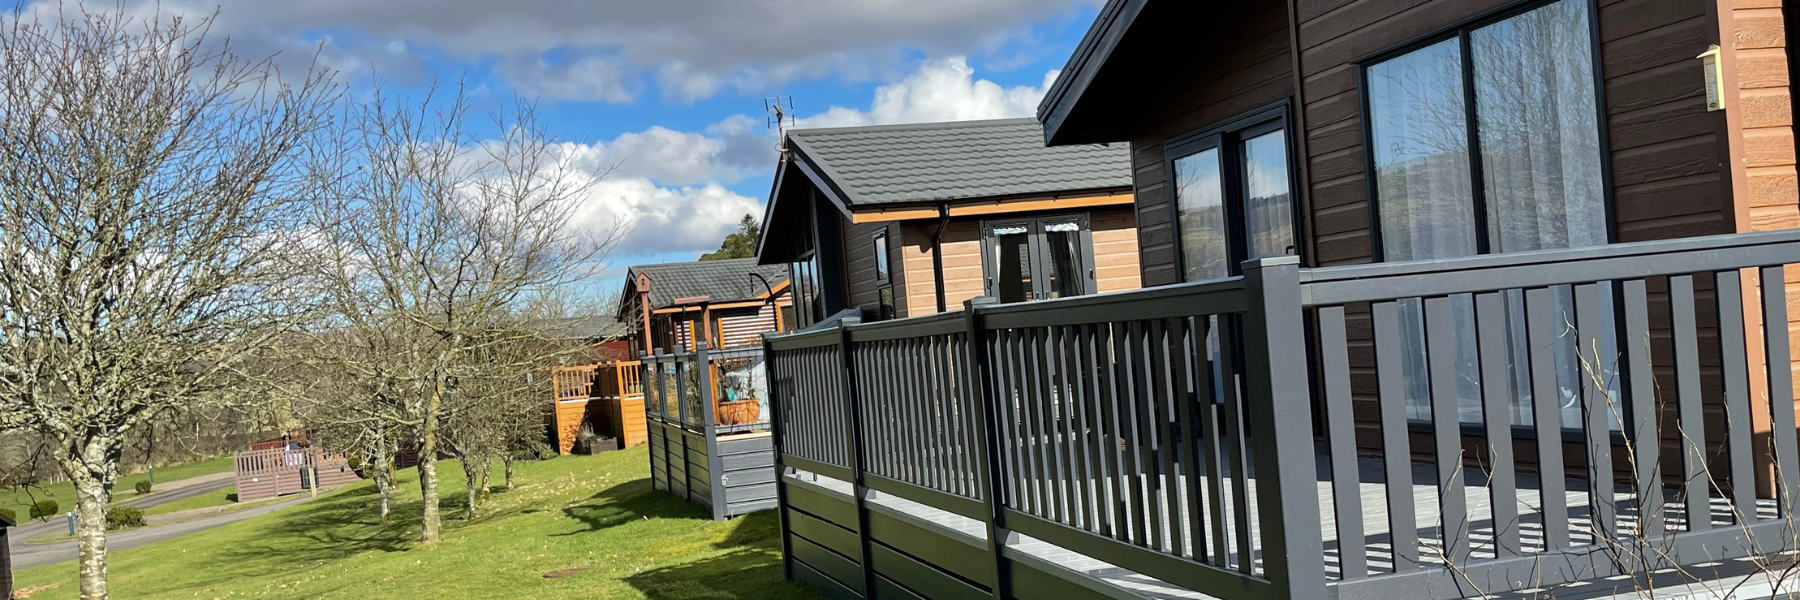 Riverview Holiday Park Newcastleton Holiday Lodges For Sale